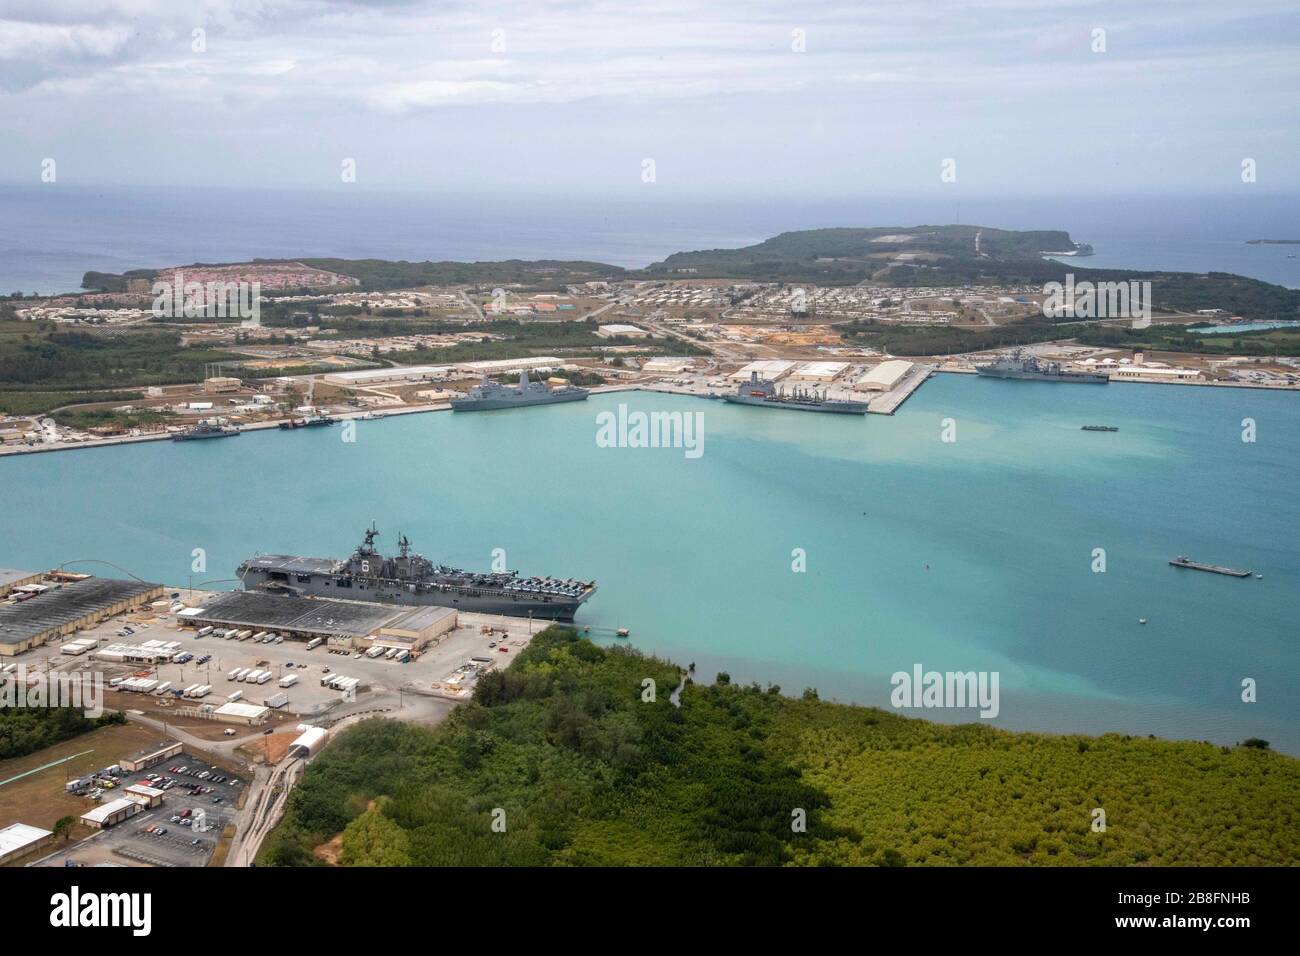 200321-N-RU810-1119 NAVAL BASE GUAM (March 21, 2020) Amphibious assault ship USS America (LHA 6), San Antonio-class dock landing ship USS Green Bay (LPD 20) and Whidbey Island-class dock landing ship USS Germantown (LSD 42), all part of the America Expeditionary Strike Group, operate from Naval Base Guam with USNS Rappahannock (T-AO 204). Operating in the U.S. 7th Fleet area of operations, the America ESG-31st Marine Expeditionary Unit team of 4,500 Sailors and Marines is prepared to conduct missions across the full spectrum of military operations. (U.S. Navy photo by Mass Communication Specia Stock Photo